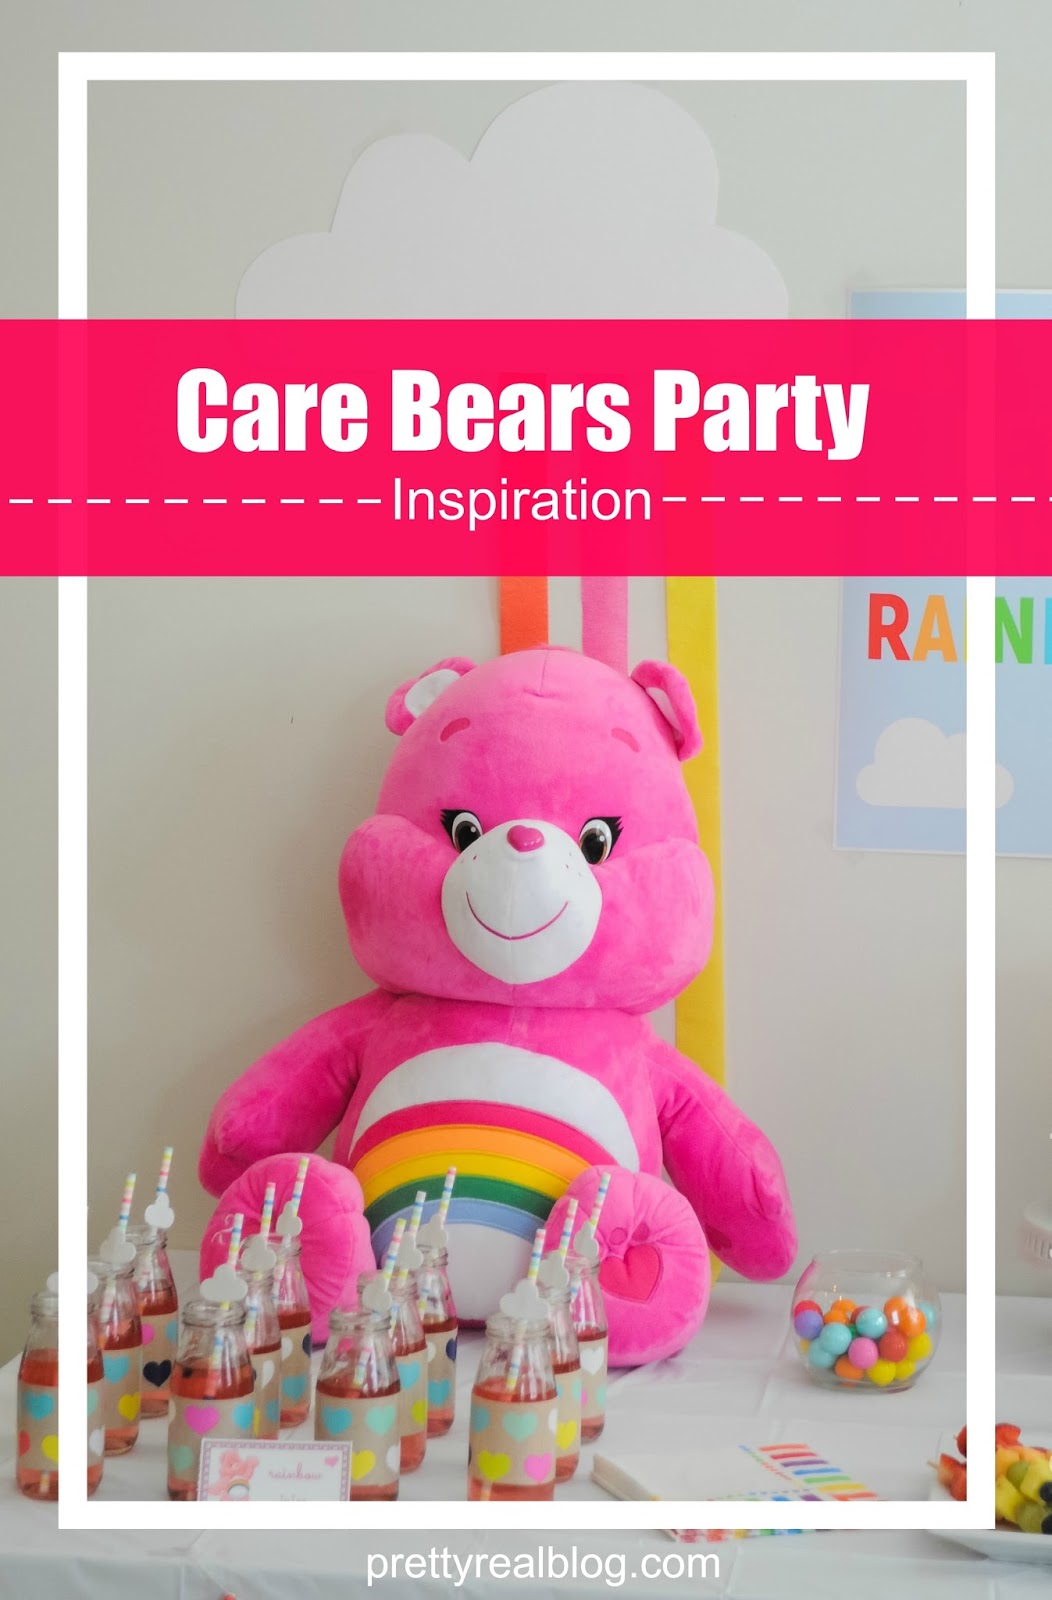 Genevieve's 'Let's Make a Rainbow' Care Bears Party - Pretty Real